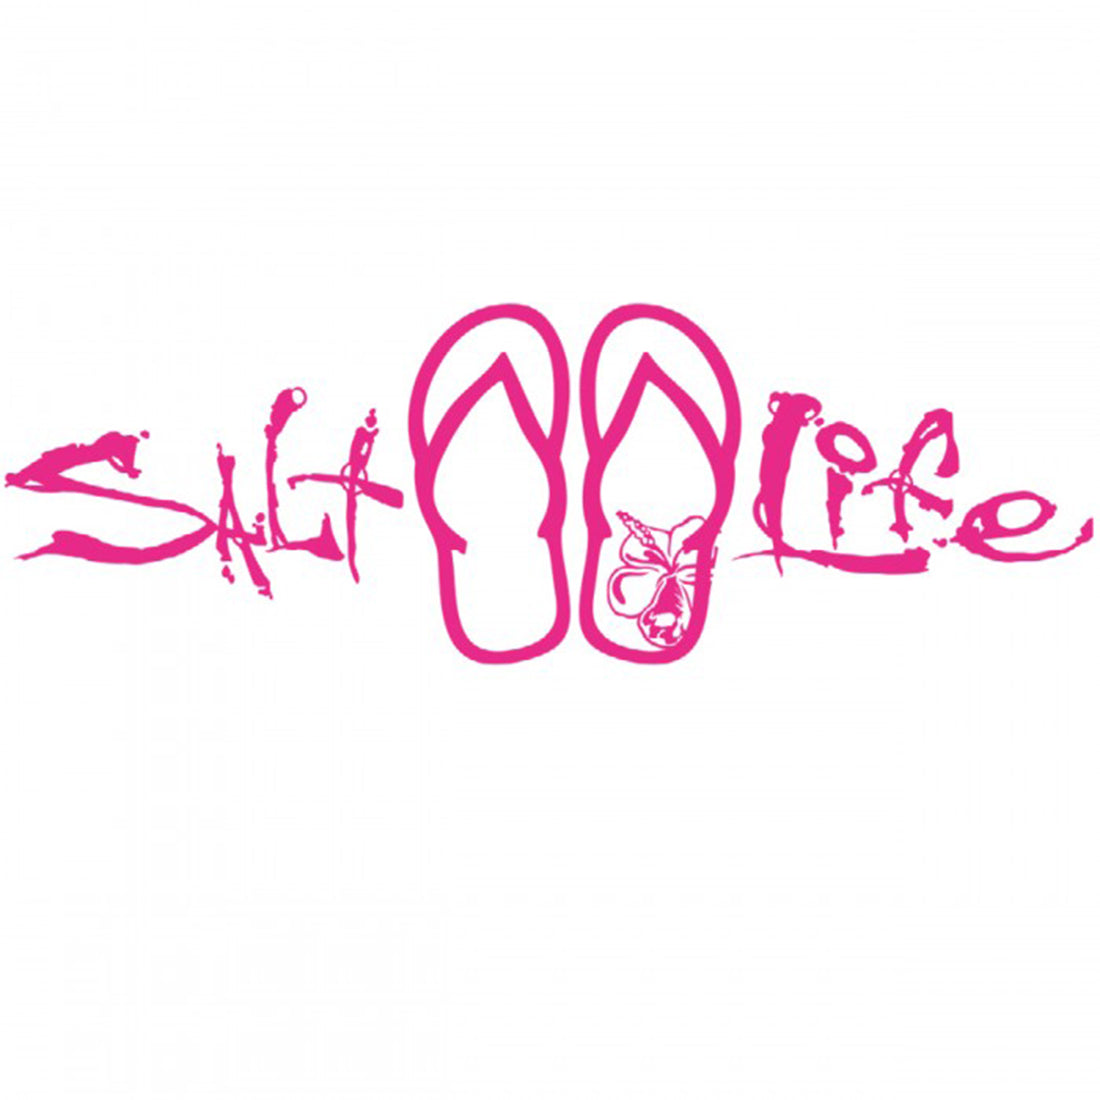 Salt Life Sandals and Signature Decal Small Pink